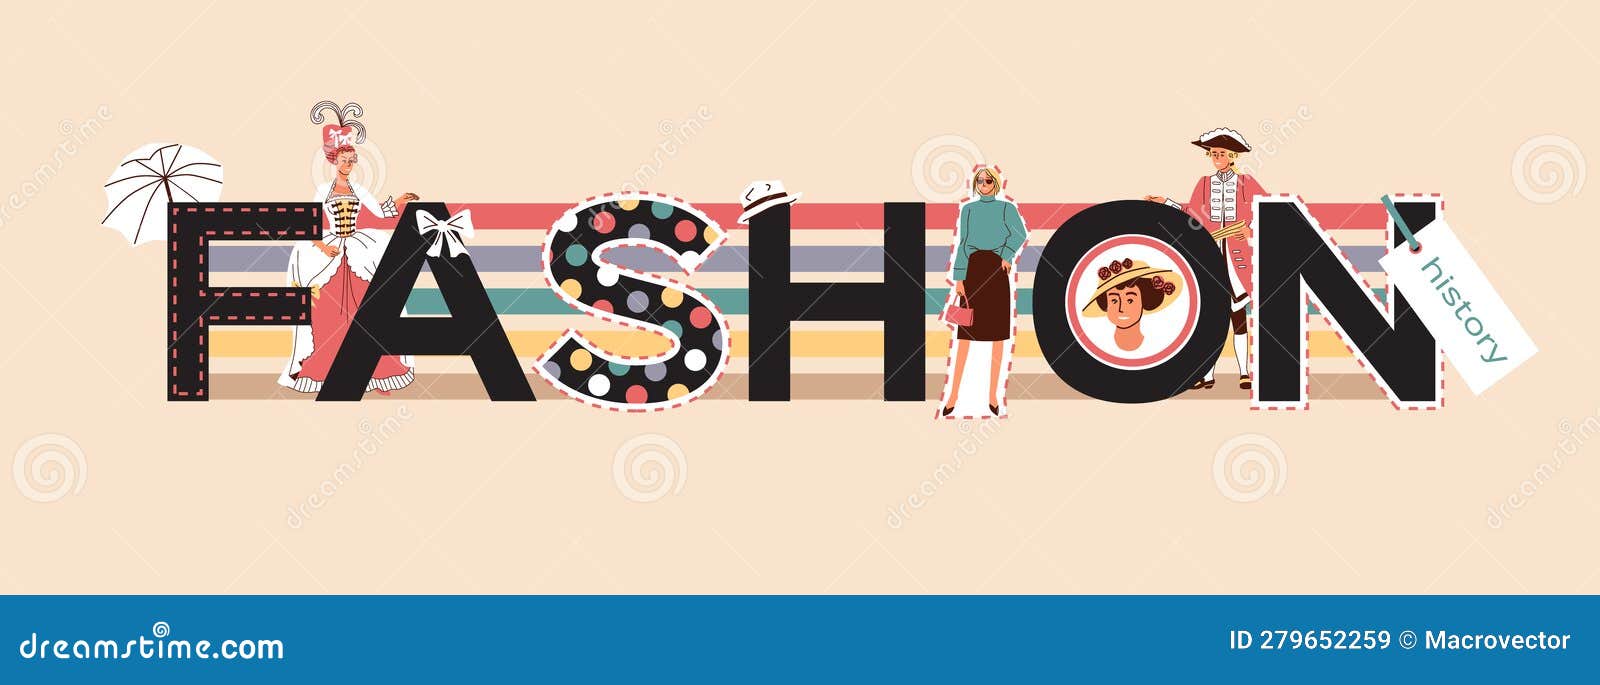 Fashion History Flat Text stock vector. Illustration of accessories ...